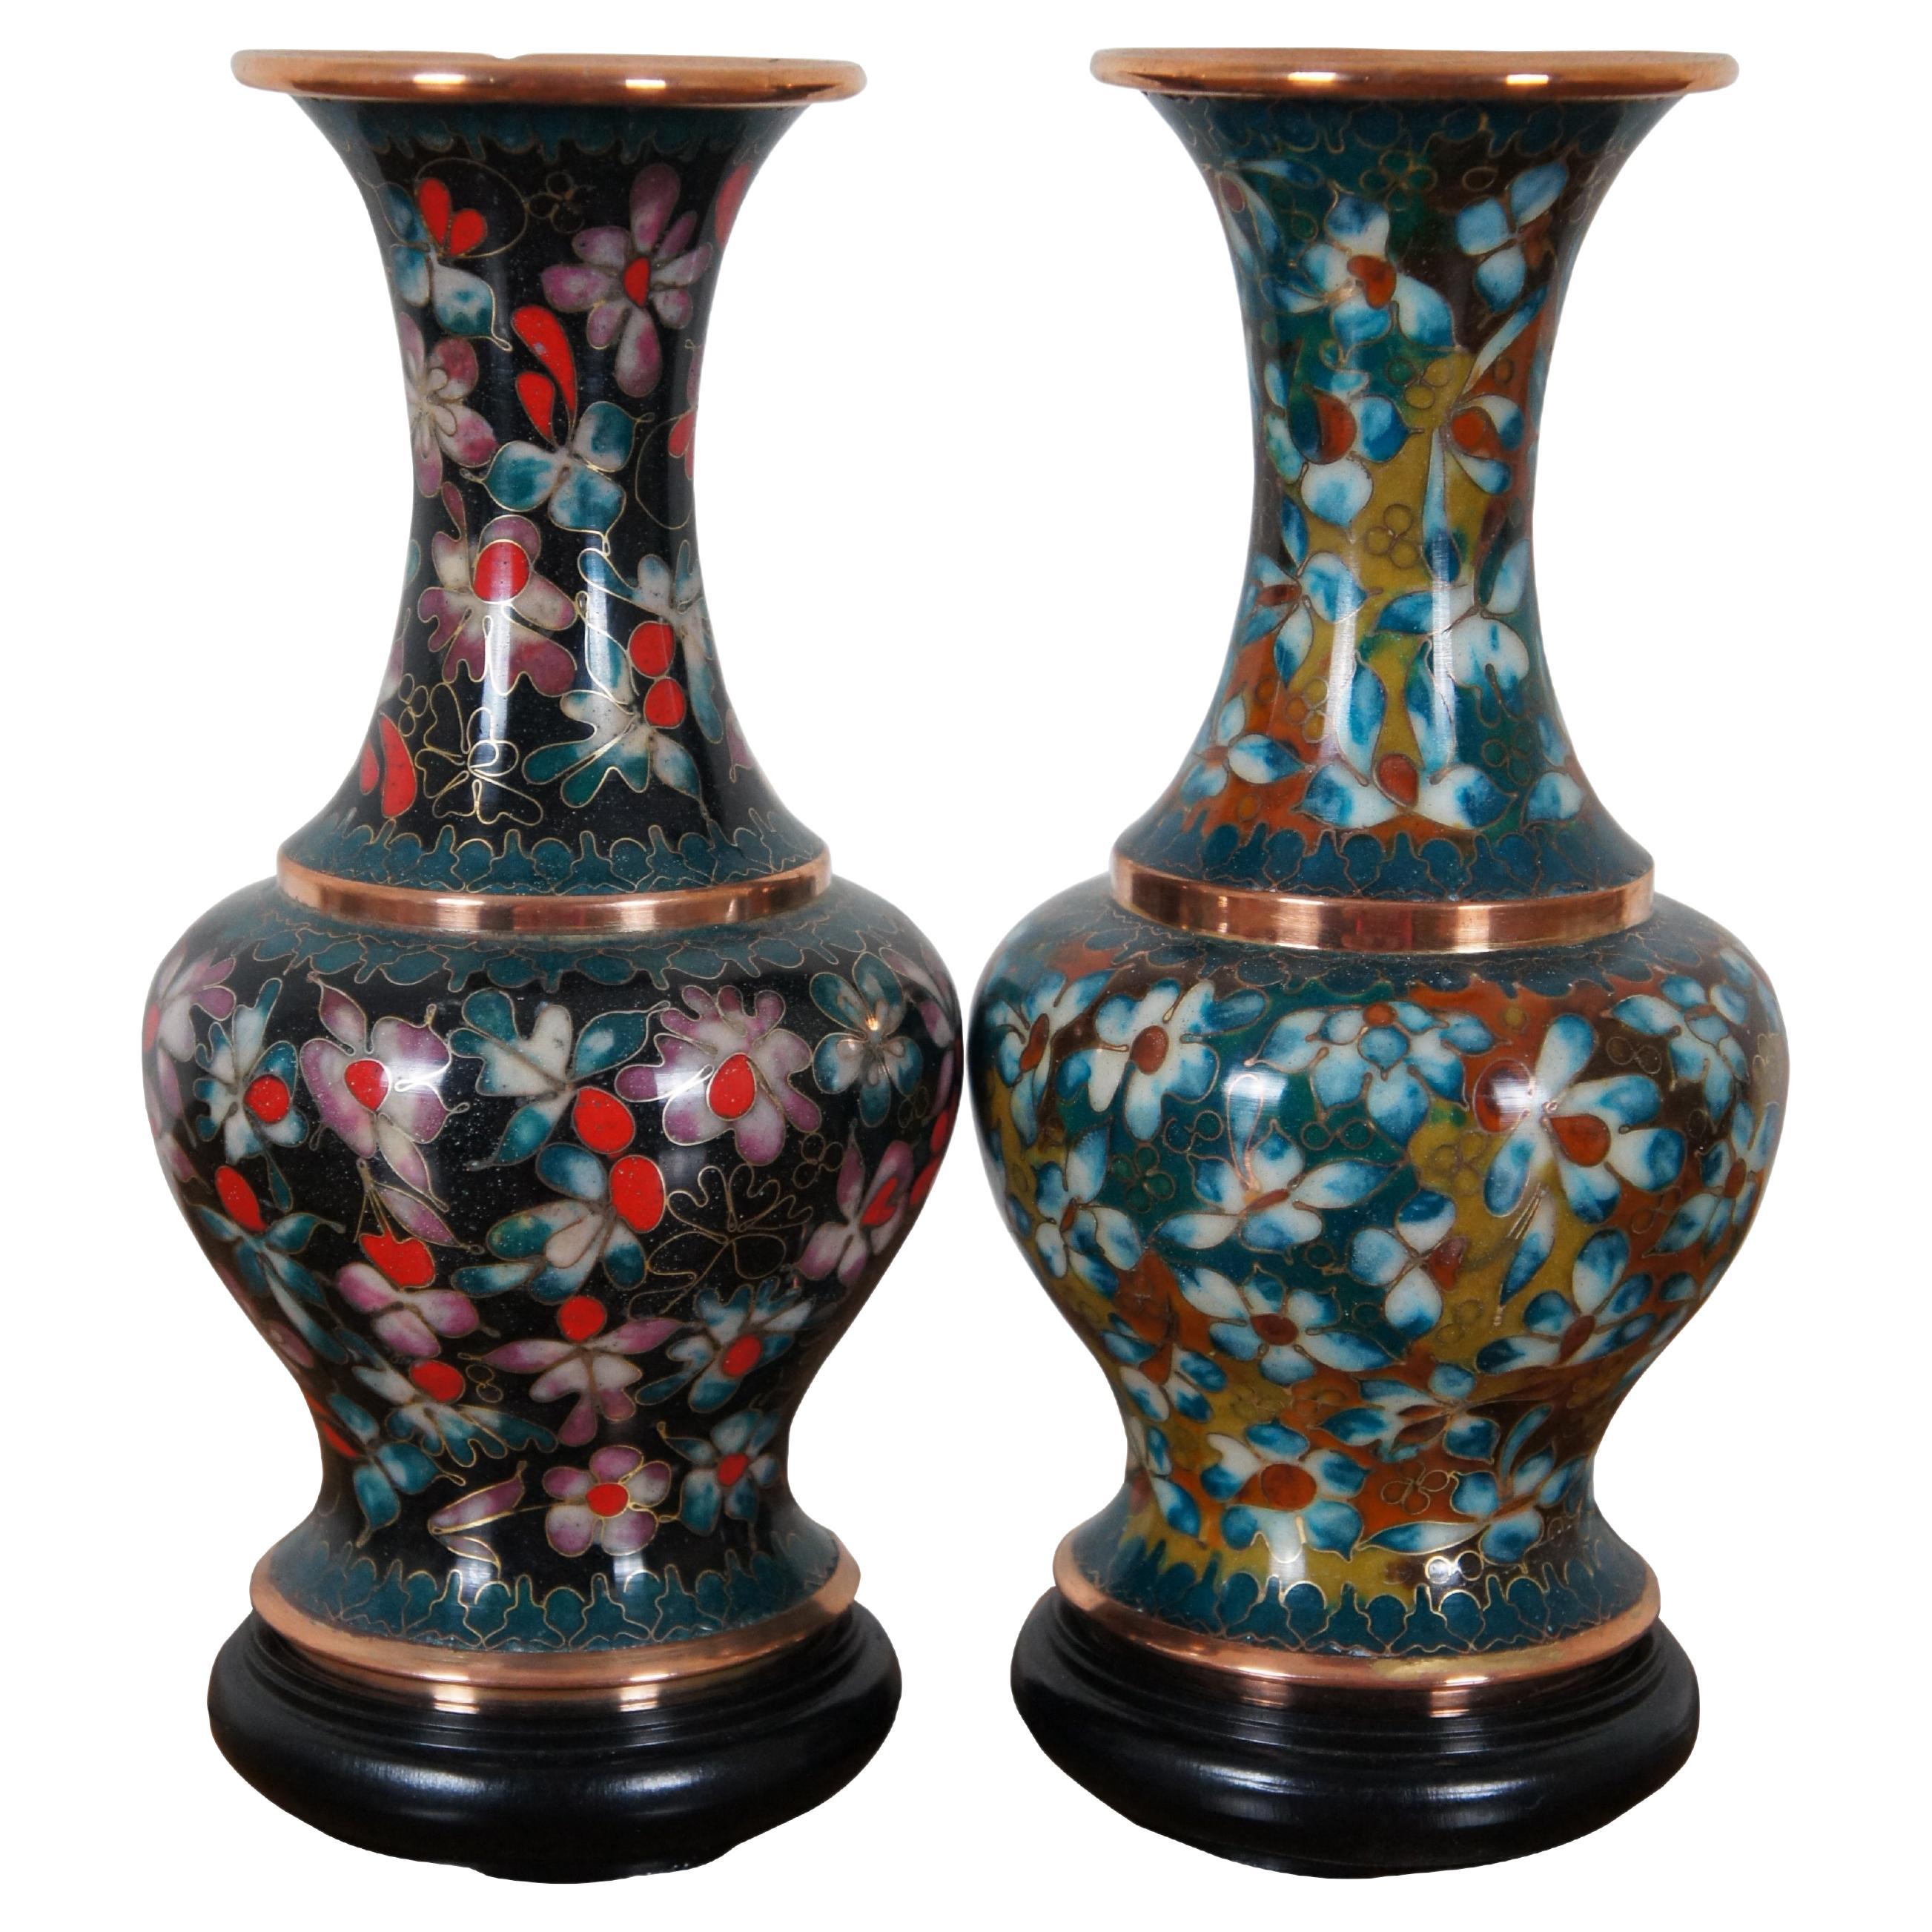 2 Robert Kuo Chinese Cloisonne Copper Enameled Mantel Urns Vases 9" For Sale